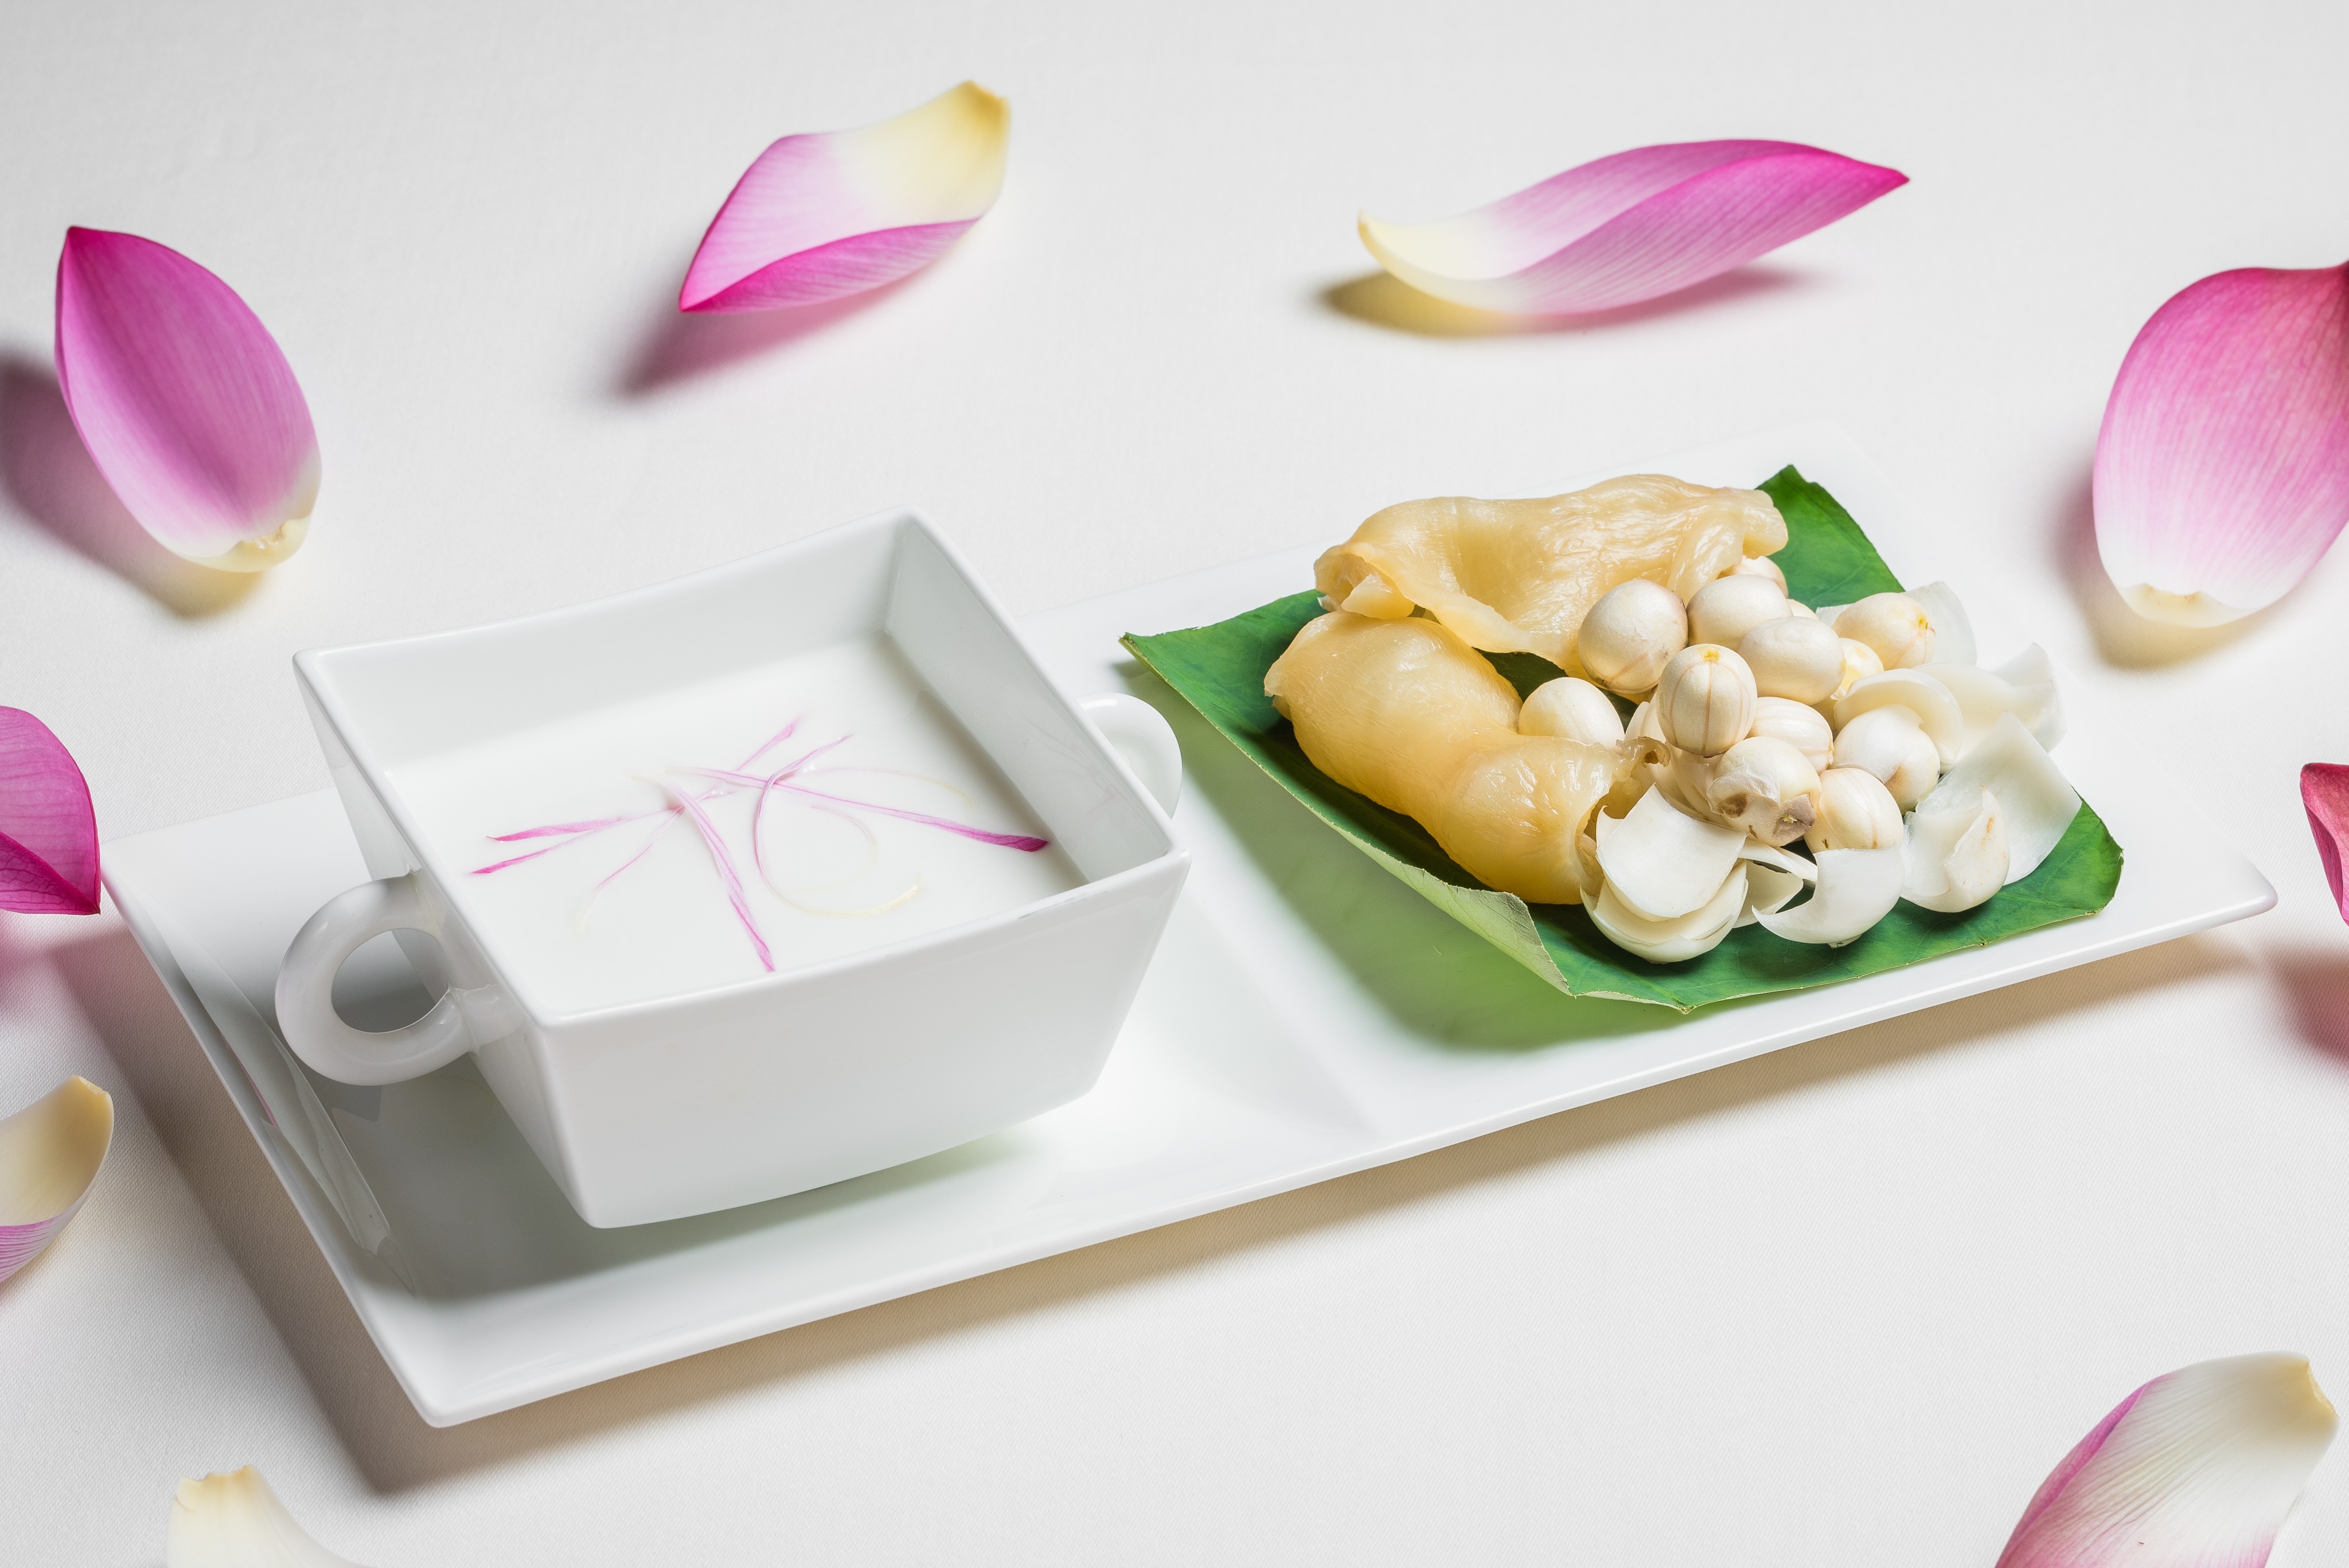 Four Seasons Macao’s Michelin-starred Chinese restaurant Zi Yat Heen’s double boiled fish maw, served with almond cream, fresh lily bulbs and lotus seeds, which is one of many delicious dishes served in Macau, one of the world’s prestigious Unesco ‘Creative Cities of Gastronomy’.